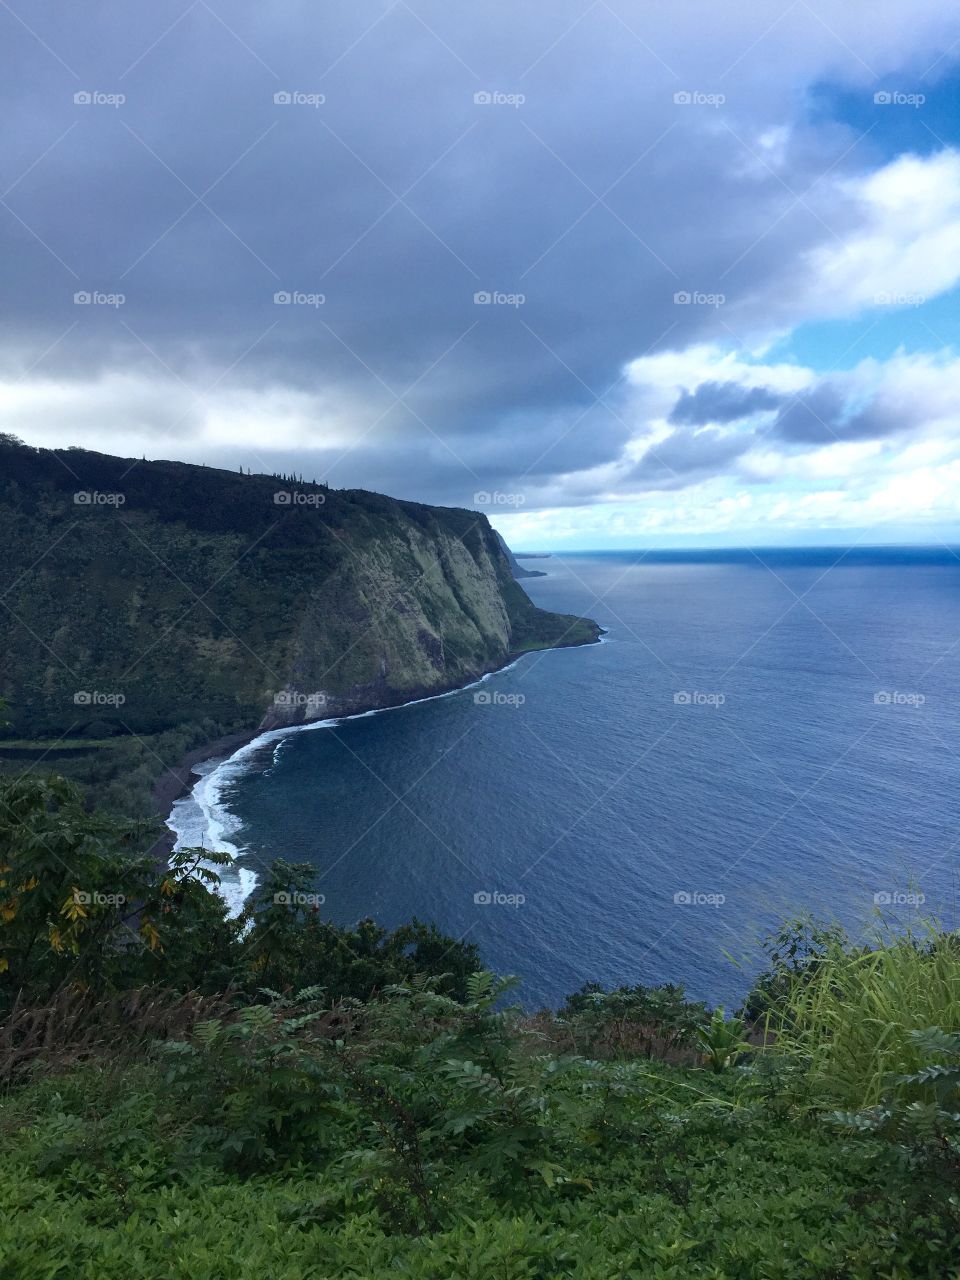 Awesome Beaches and Cliffs, Waipio Valley